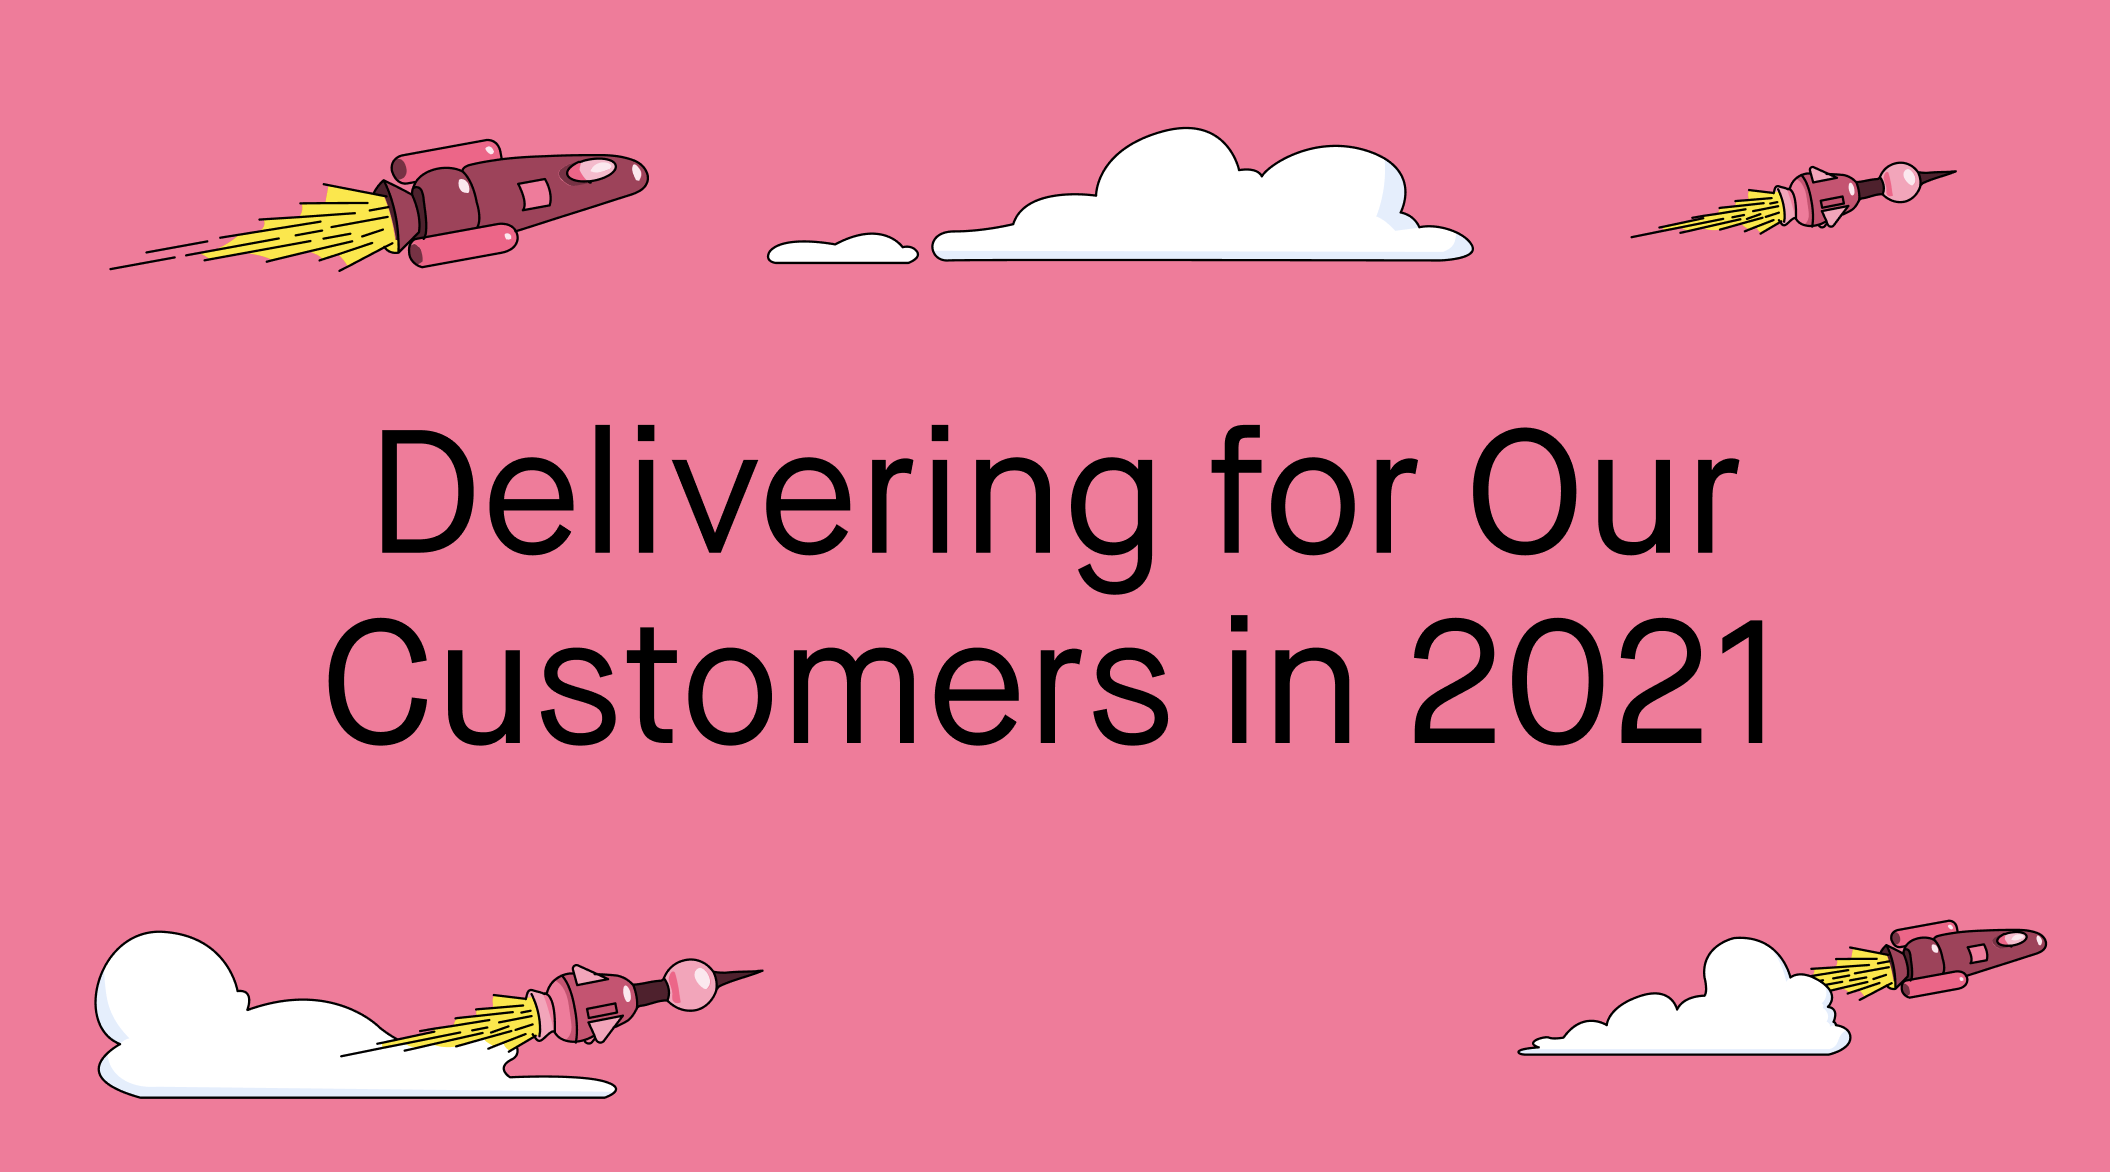 Delivering for Our Customers in 2021